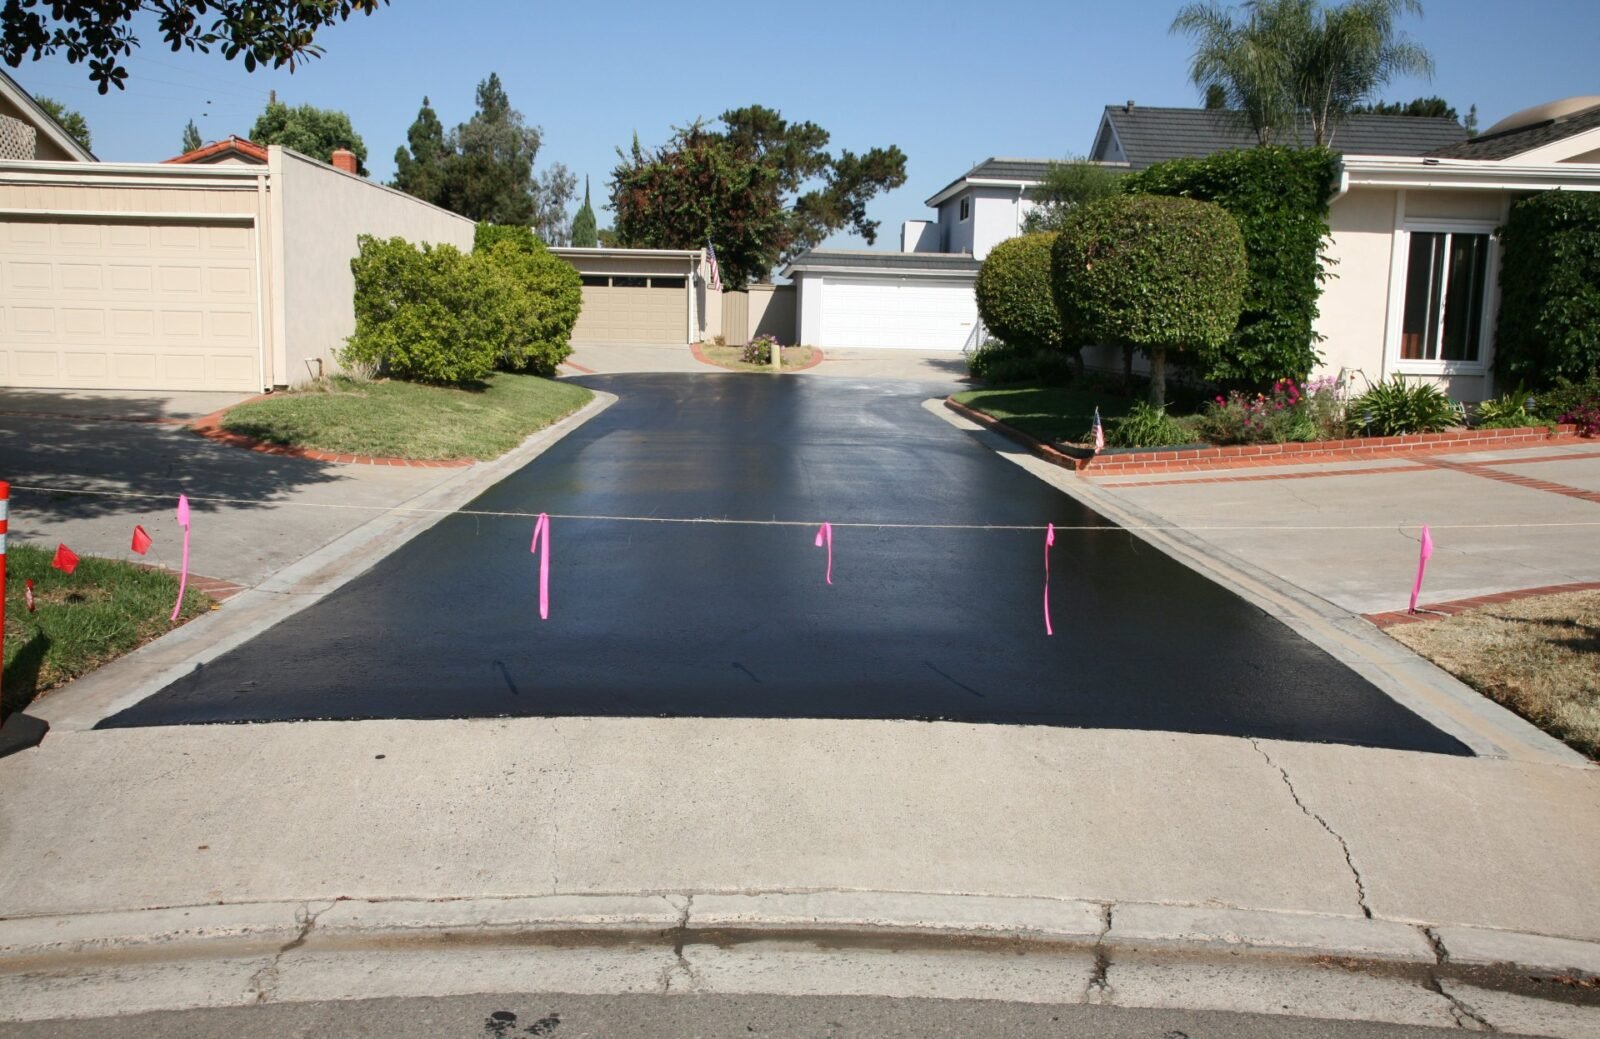 A freshly paved black asphalt driveway by Palm Beach Asphalt is roped off with pink ribbons. It is situated between two white houses with well-kept lawns and shrubs. There is a garage at the end of the driveway. The sky is clear and blue.